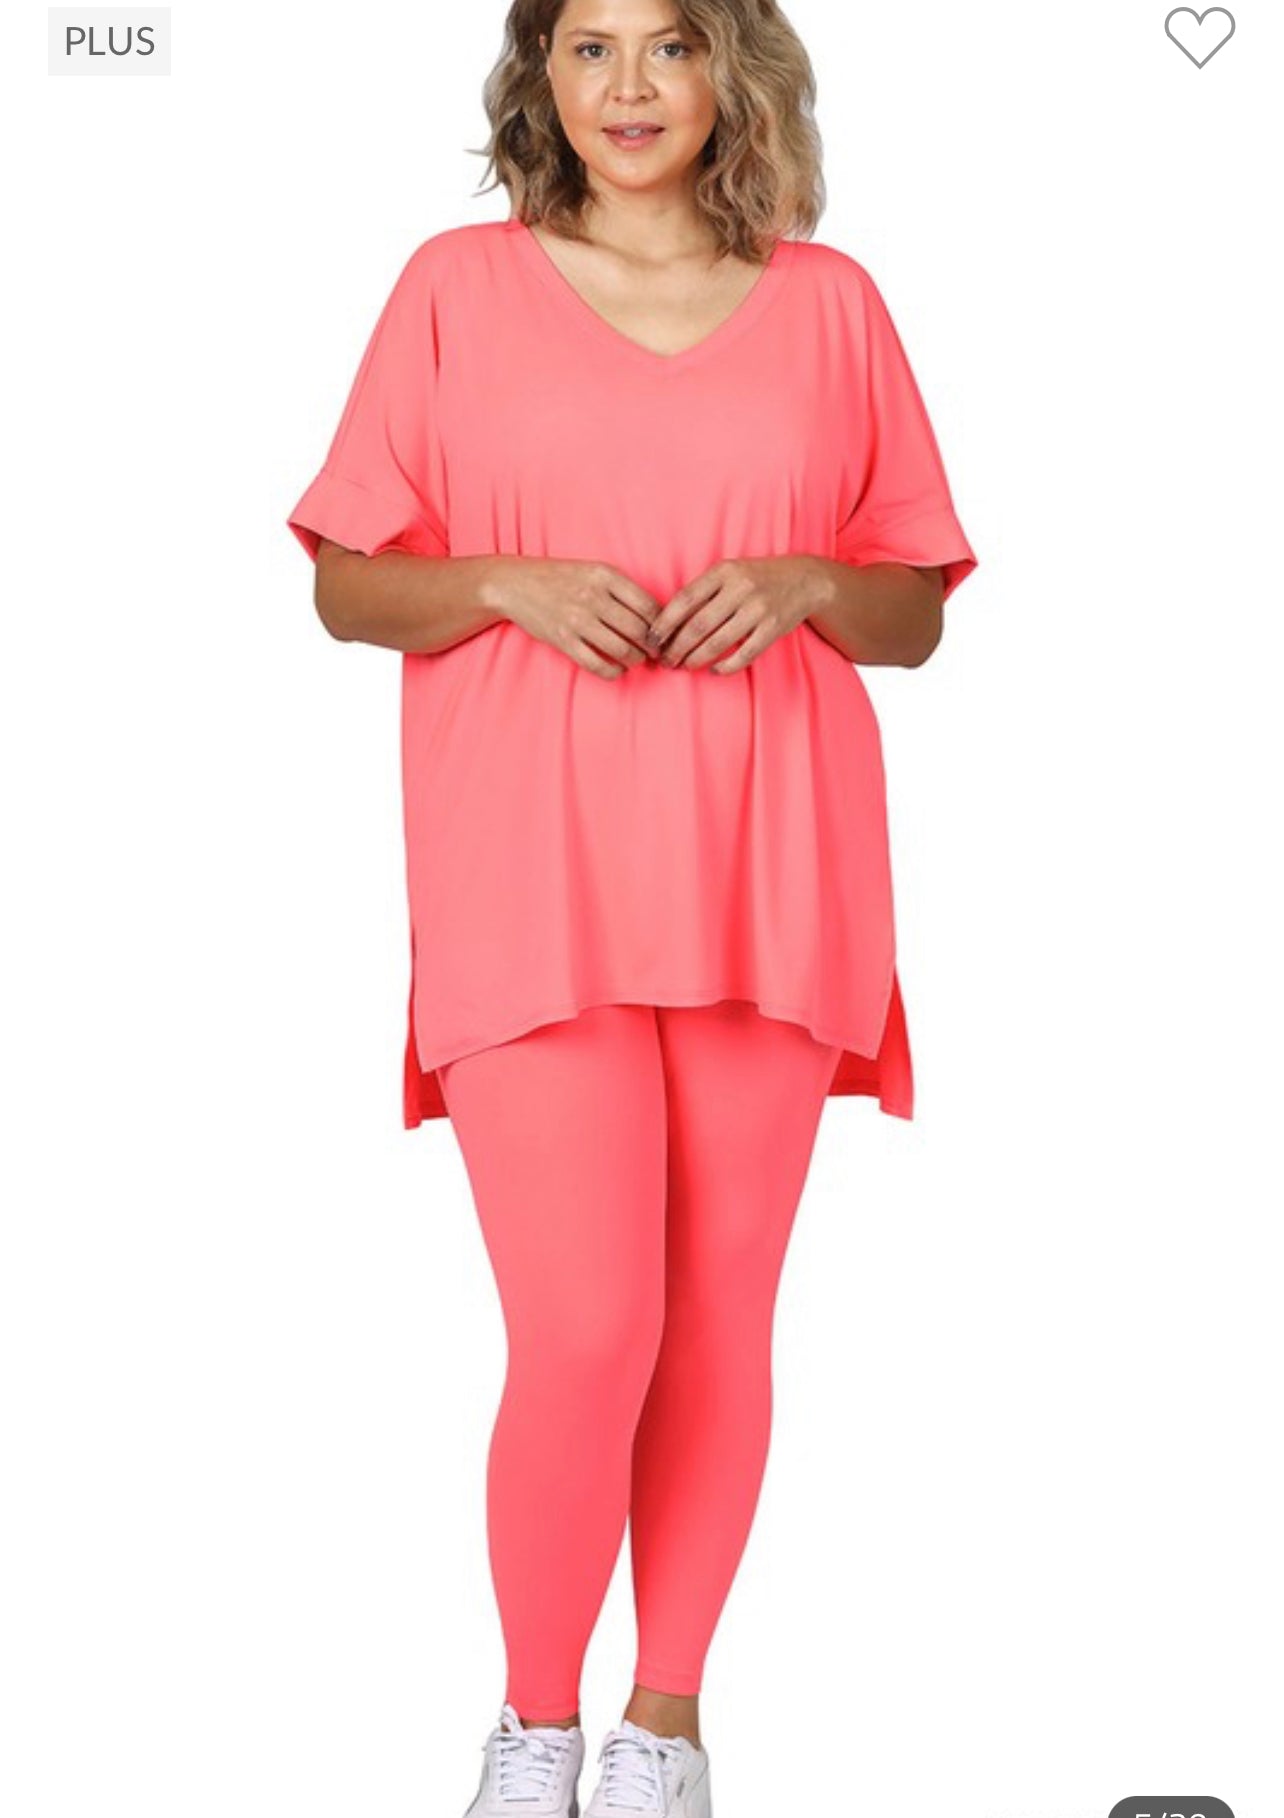 Plus Chill Set Coral Pink